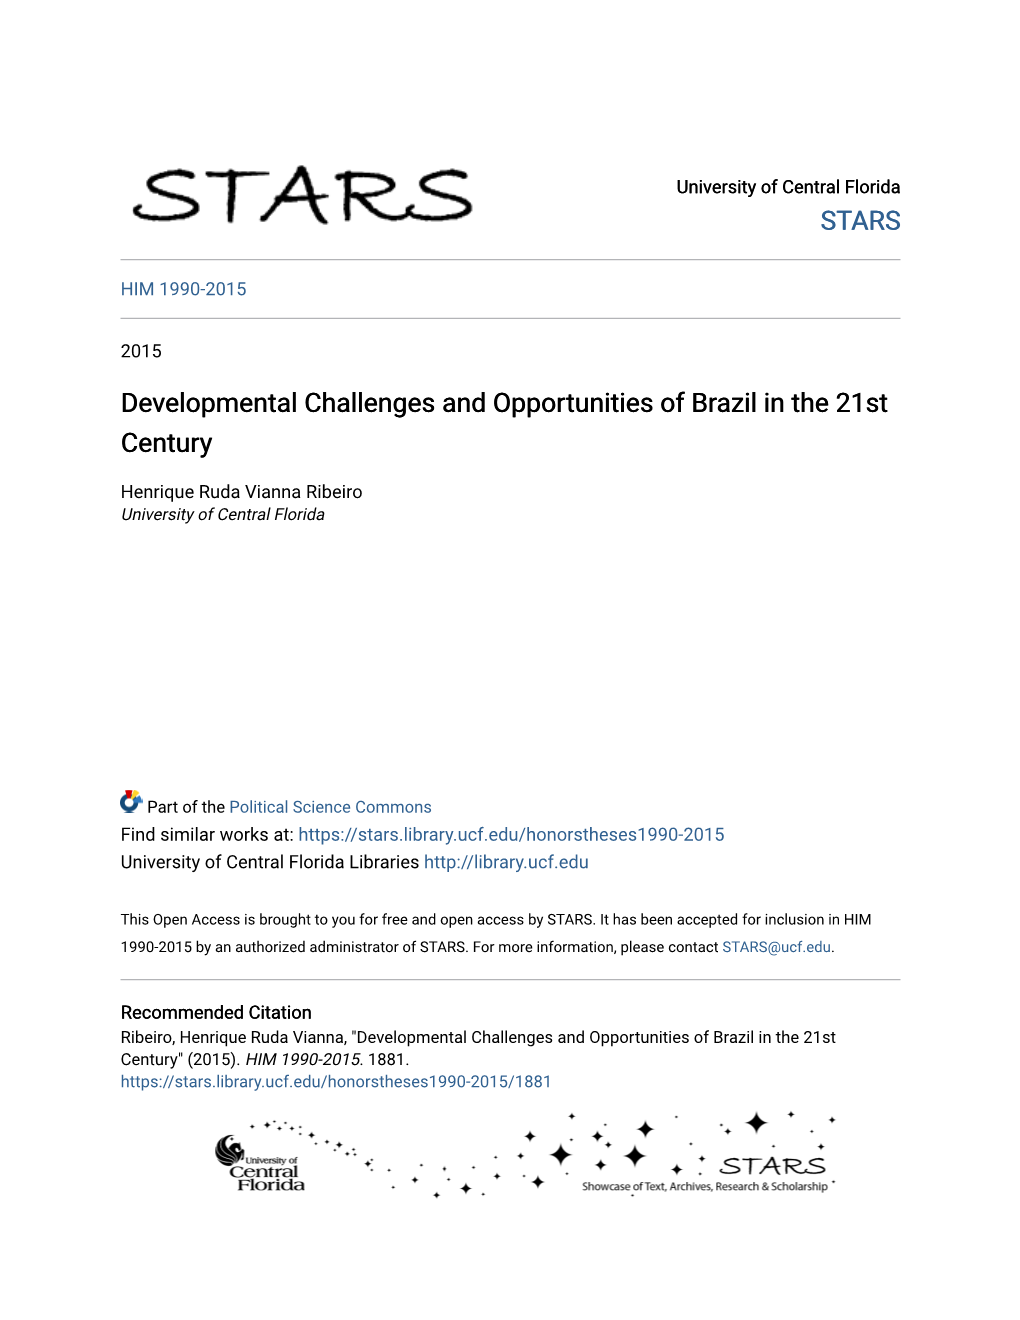 Developmental Challenges and Opportunities of Brazil in the 21St Century